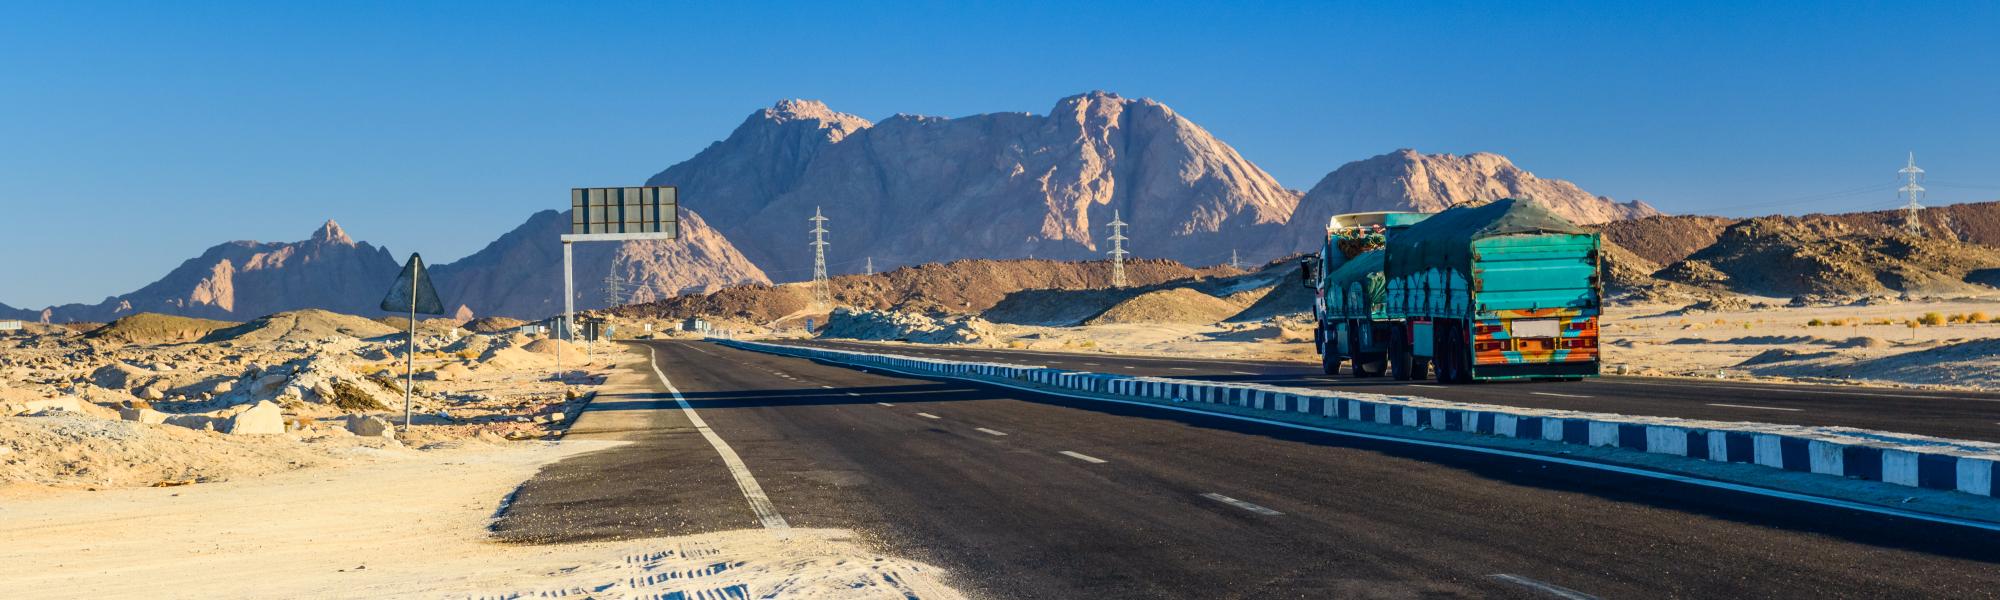 Egypt strengthens trade links with TIR accession